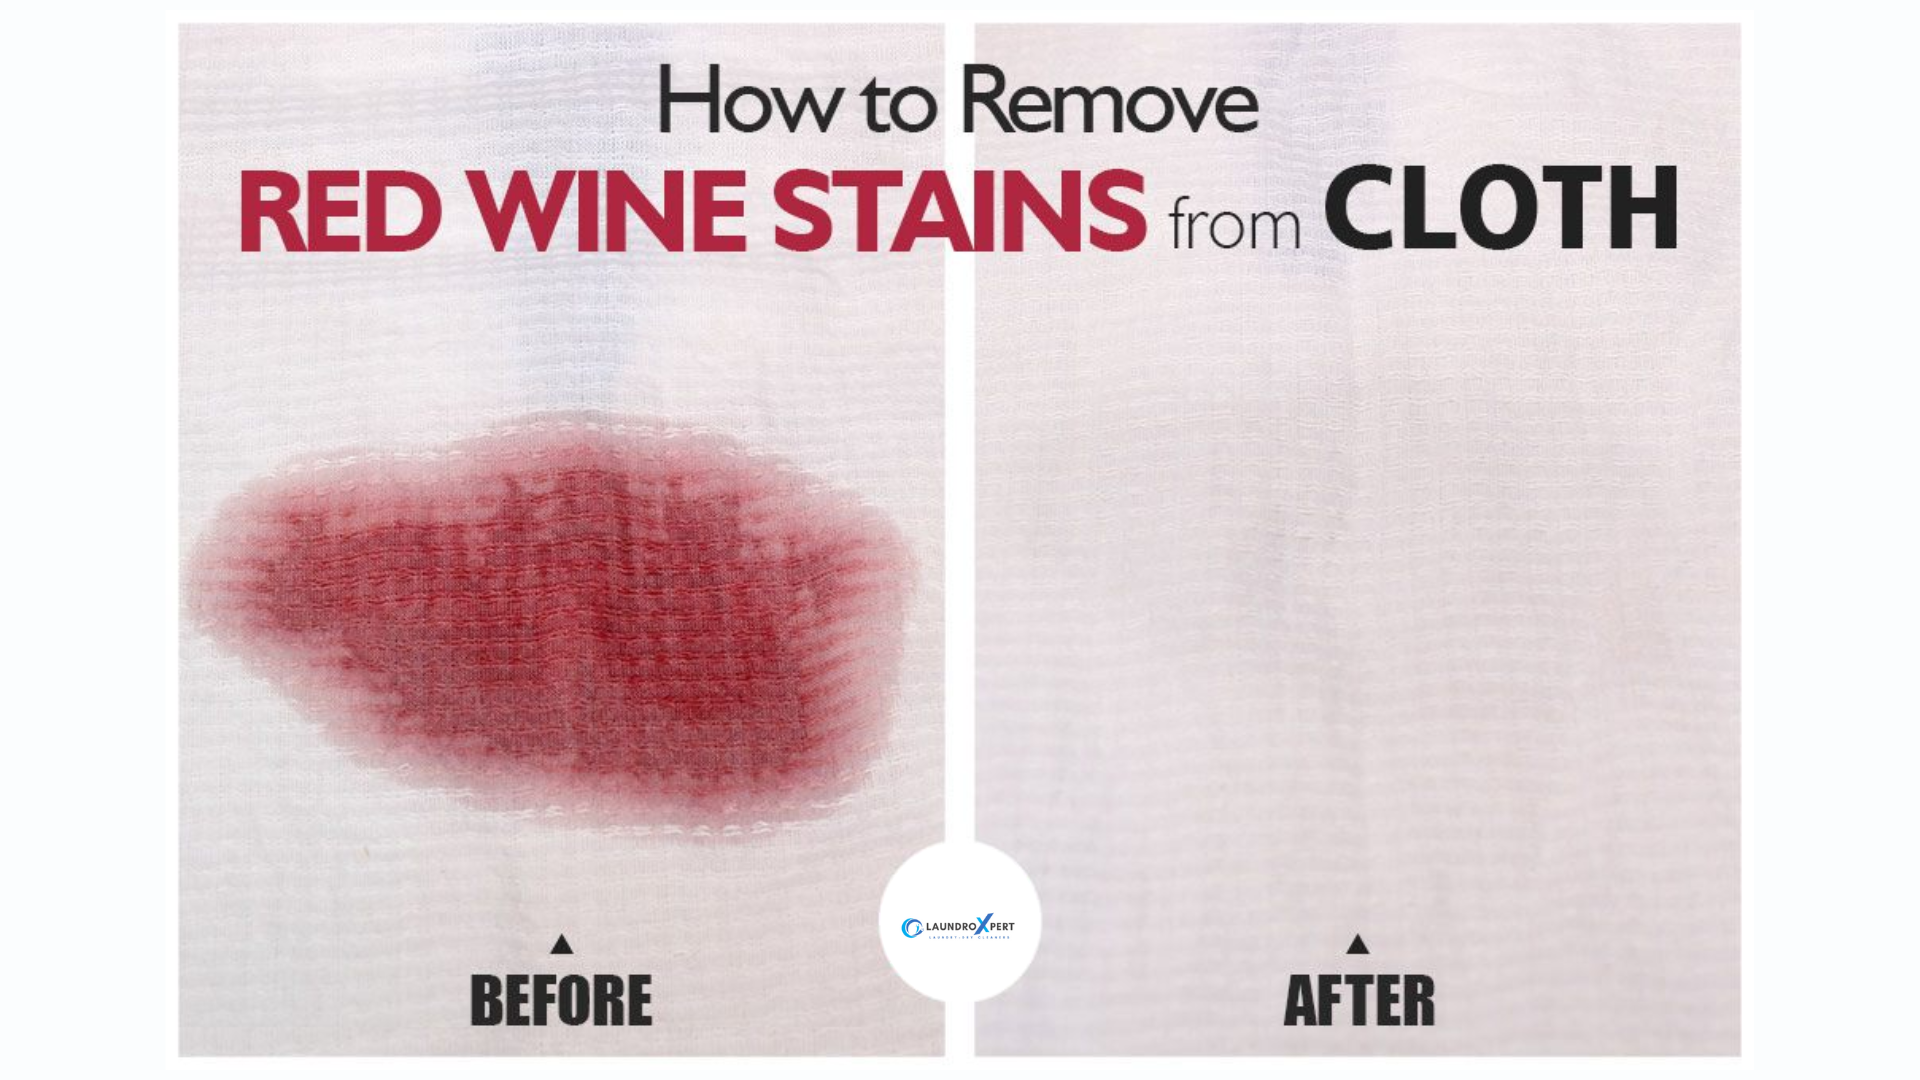 How To Remove The Red Wine Stains From Your Fabrics?